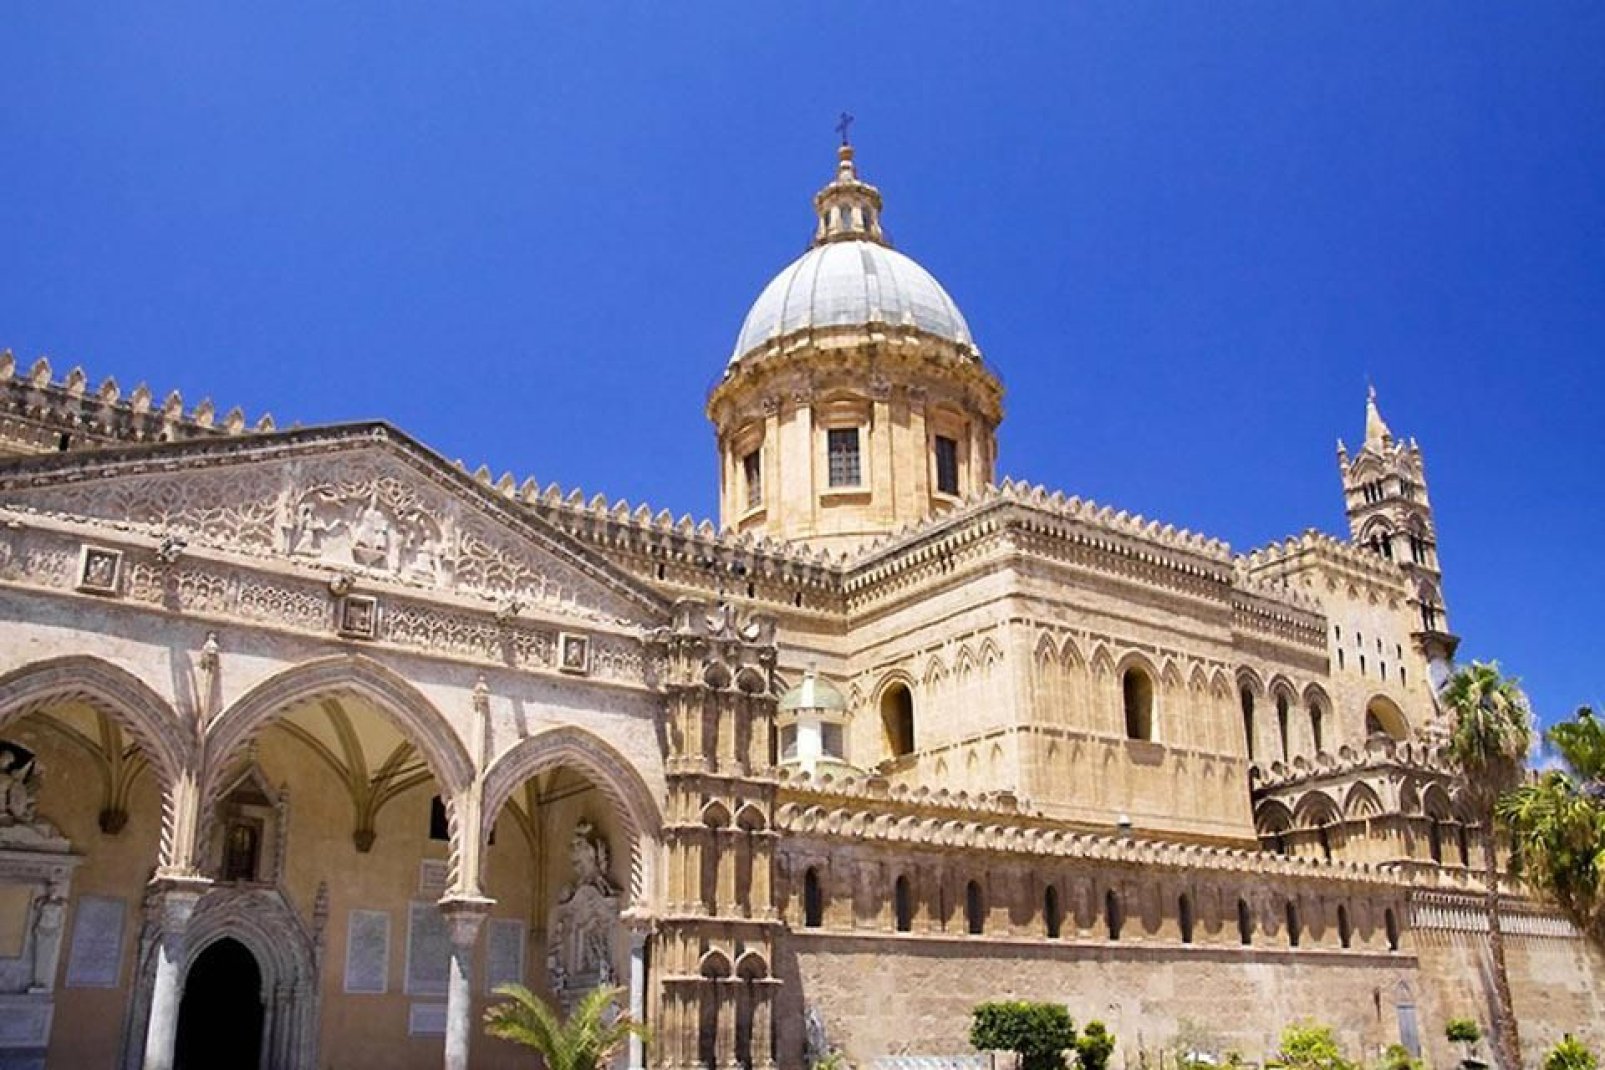 The Palermo Cathedral, dedicated to Our Lady of the Assumption, is an imposing architectural complex that combines various styles.